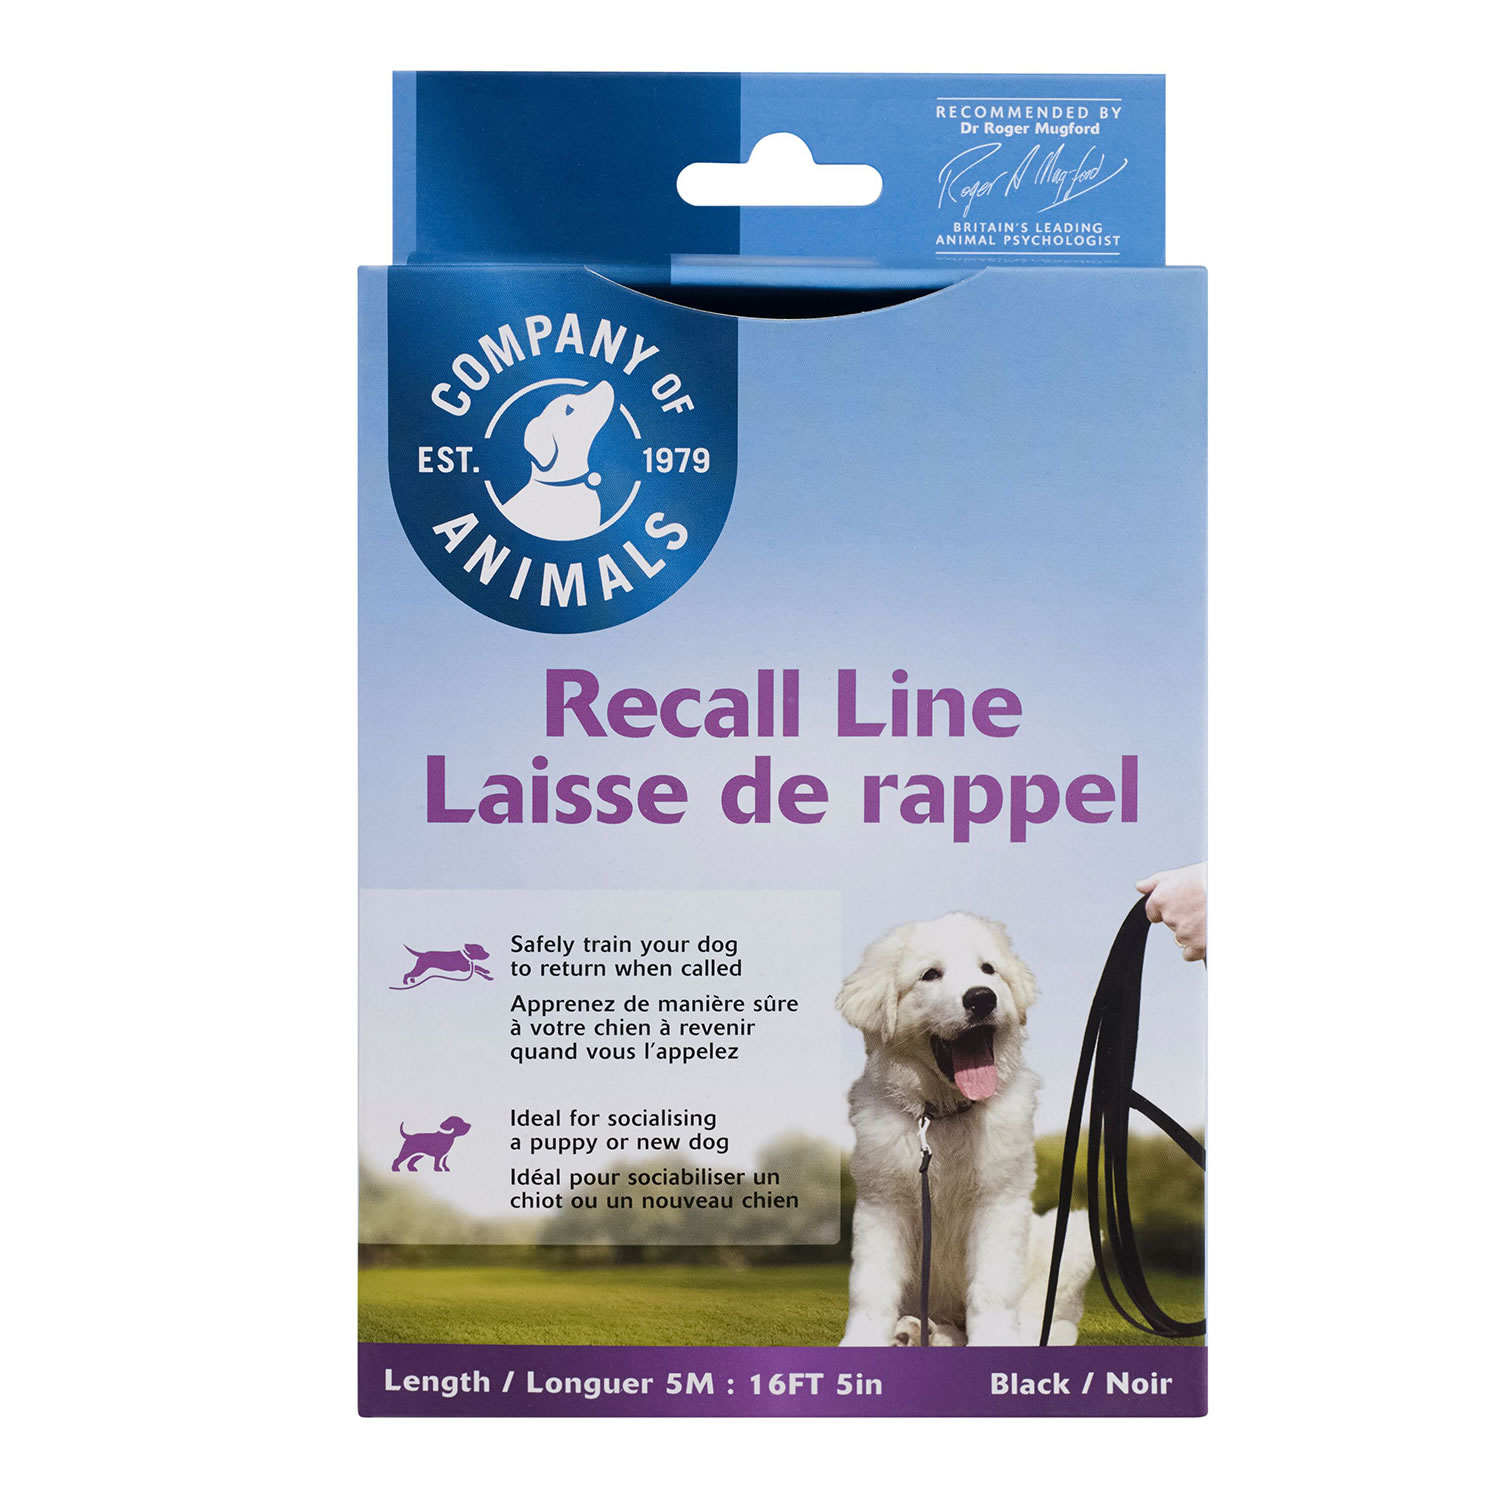 CO OF ANIMALS LONG RECALL LINE 5M 5 M